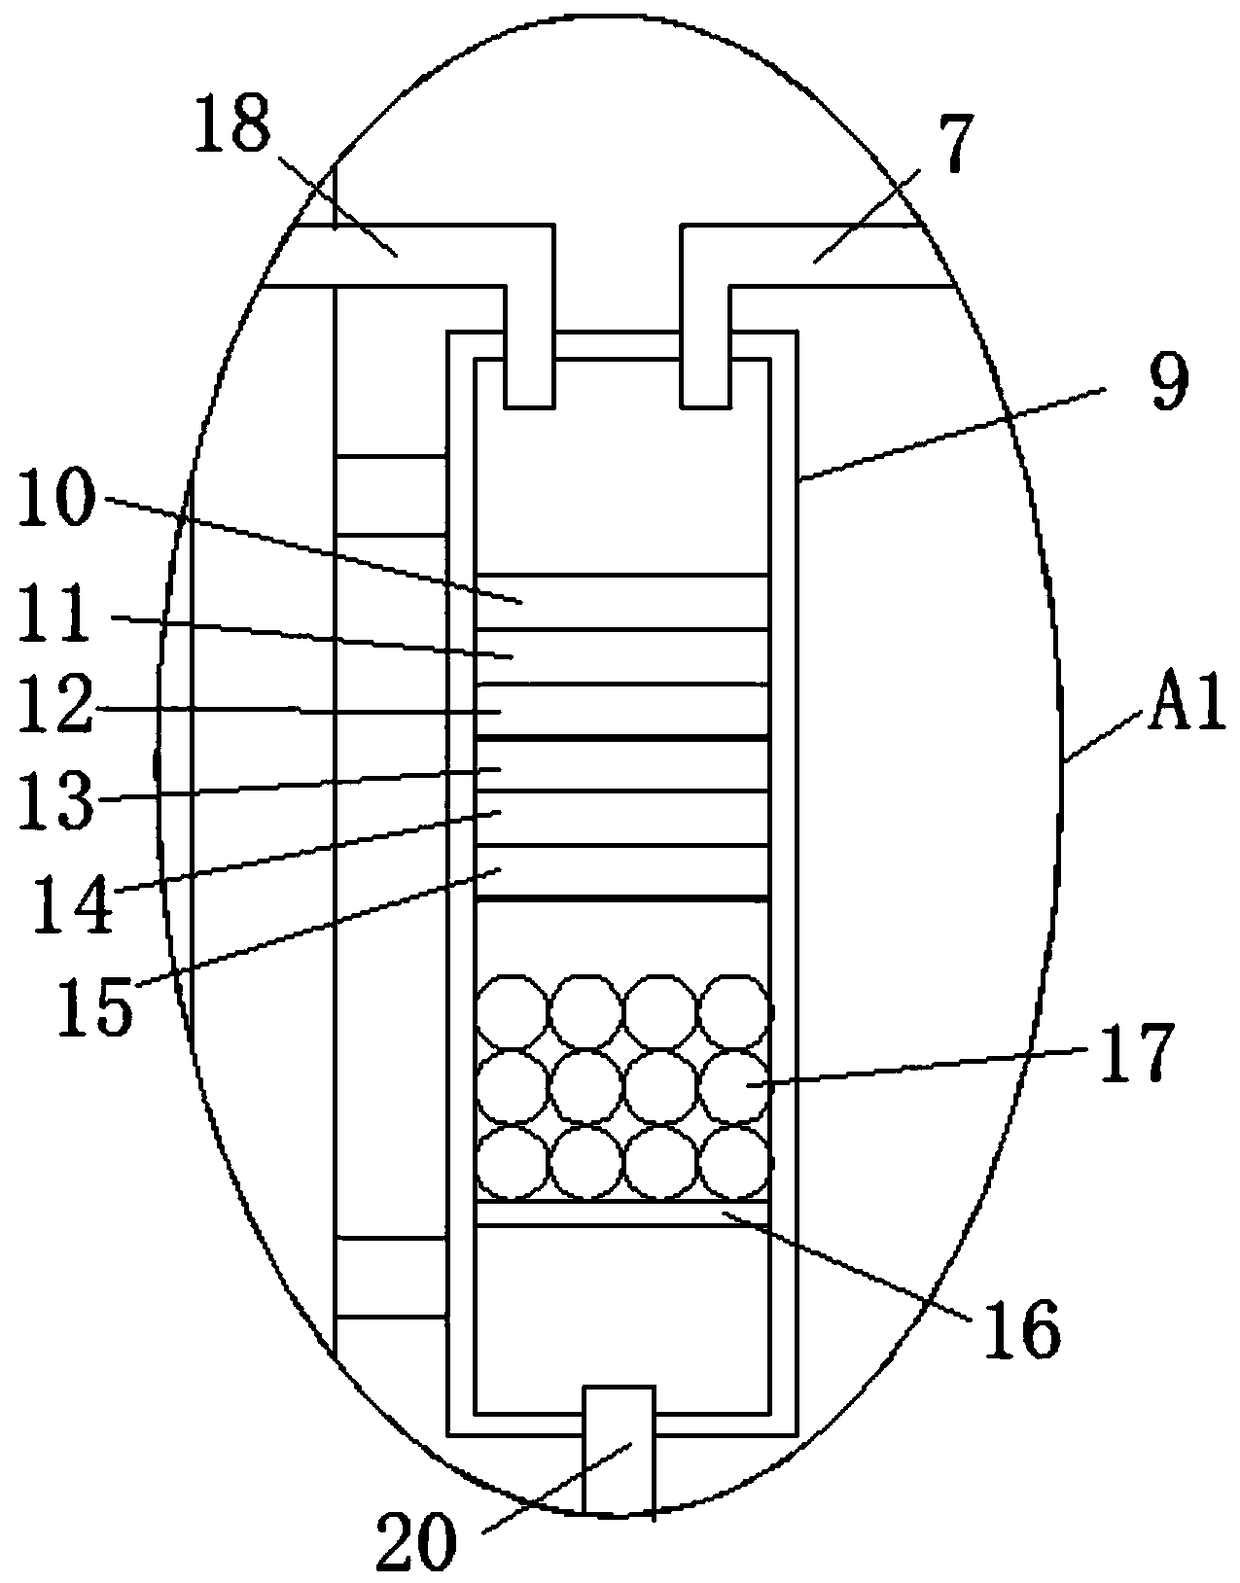 Large-scale flowing water hydrotherapy apparatus for medical treatment